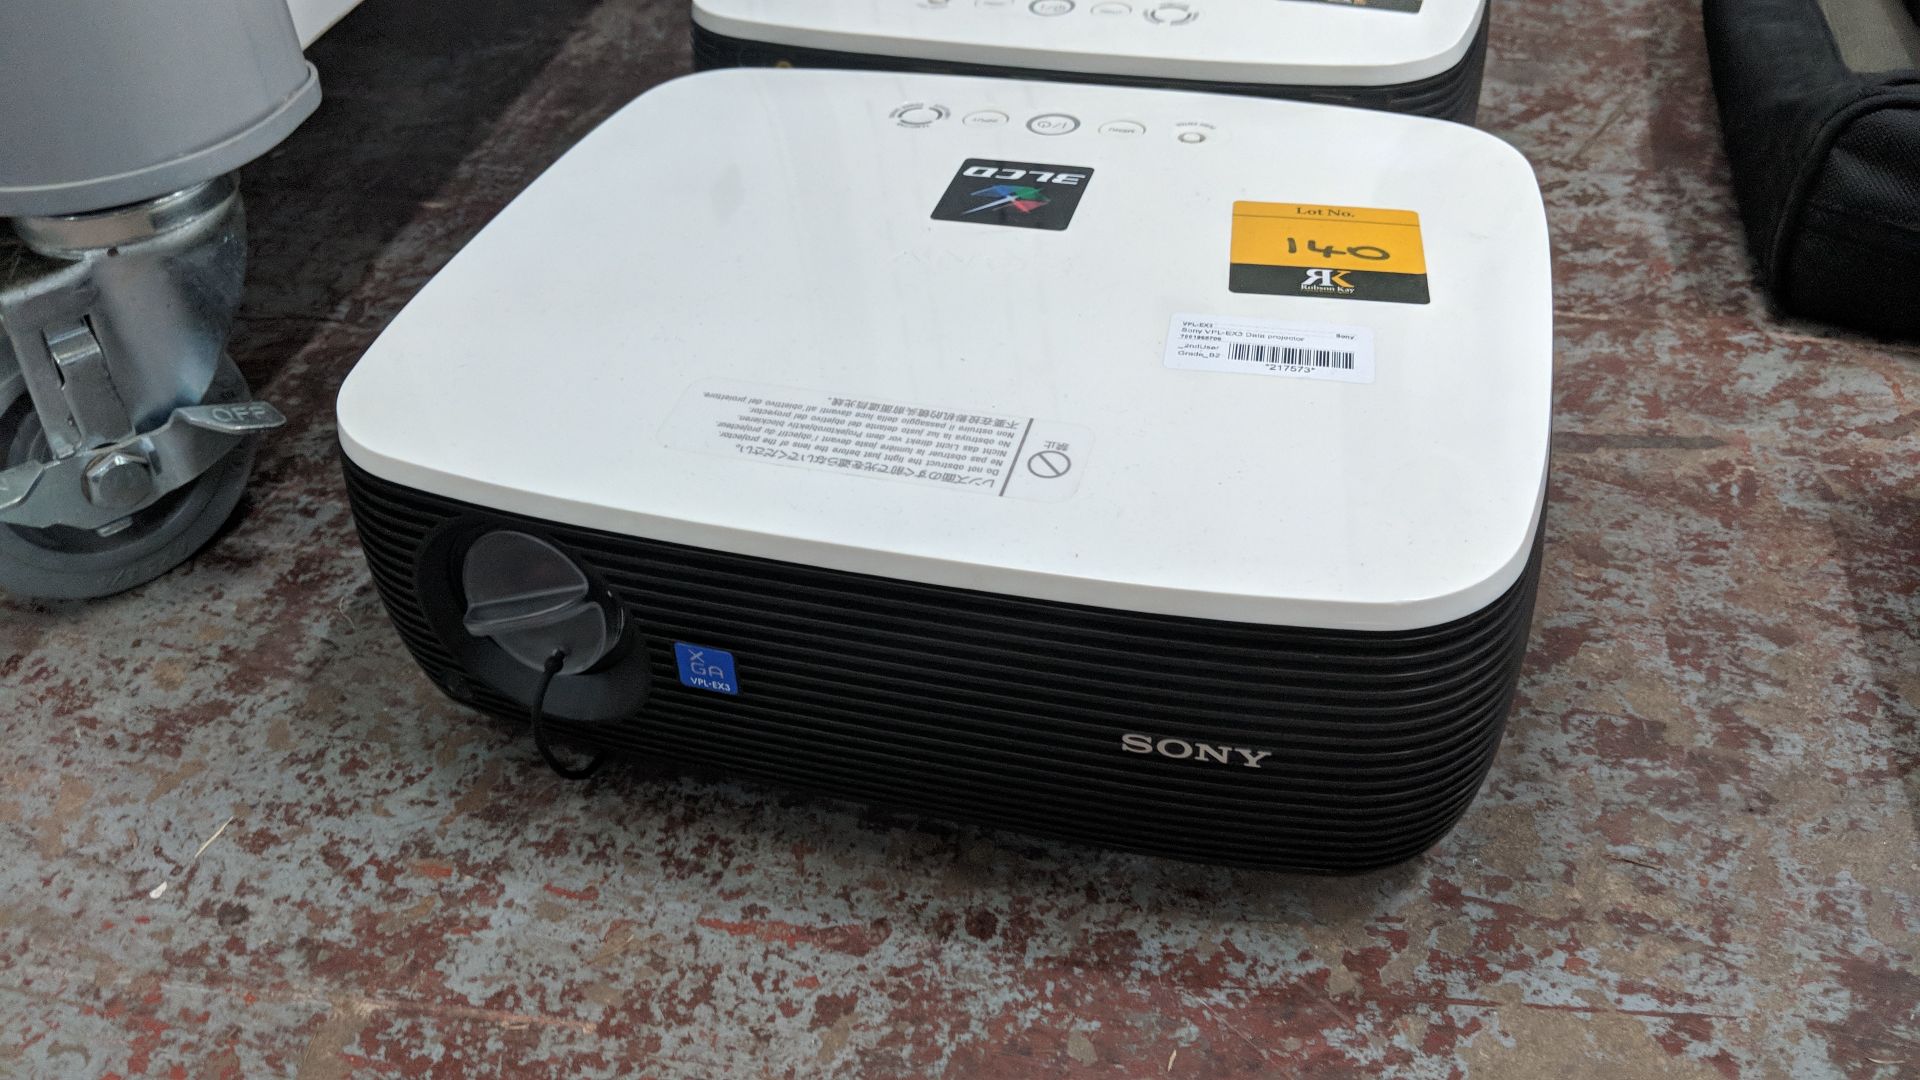 Sony model VPL-EX3 data projector IMPORTANT: Please remember goods successfully bid upon must be - Image 3 of 5